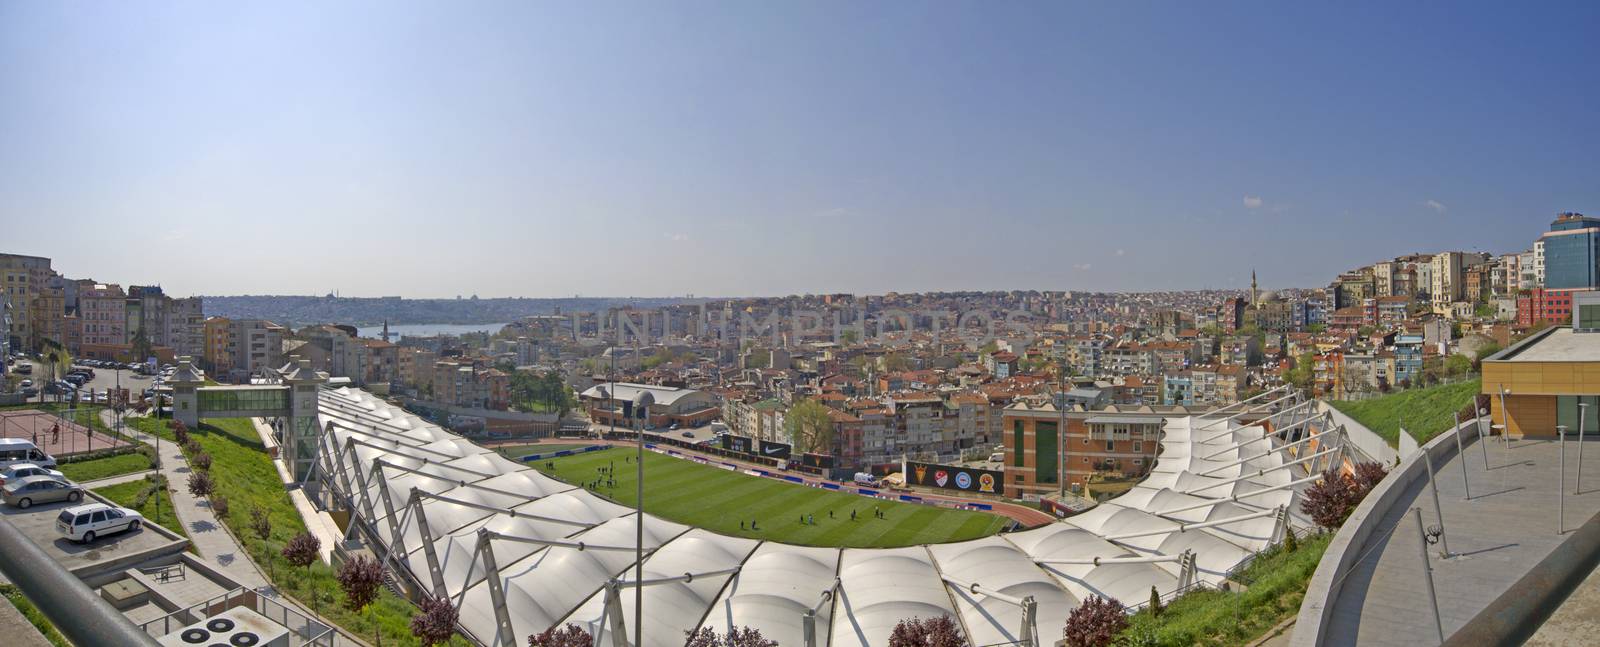 Cityscape over a residential area of Istanbul by paulvinten